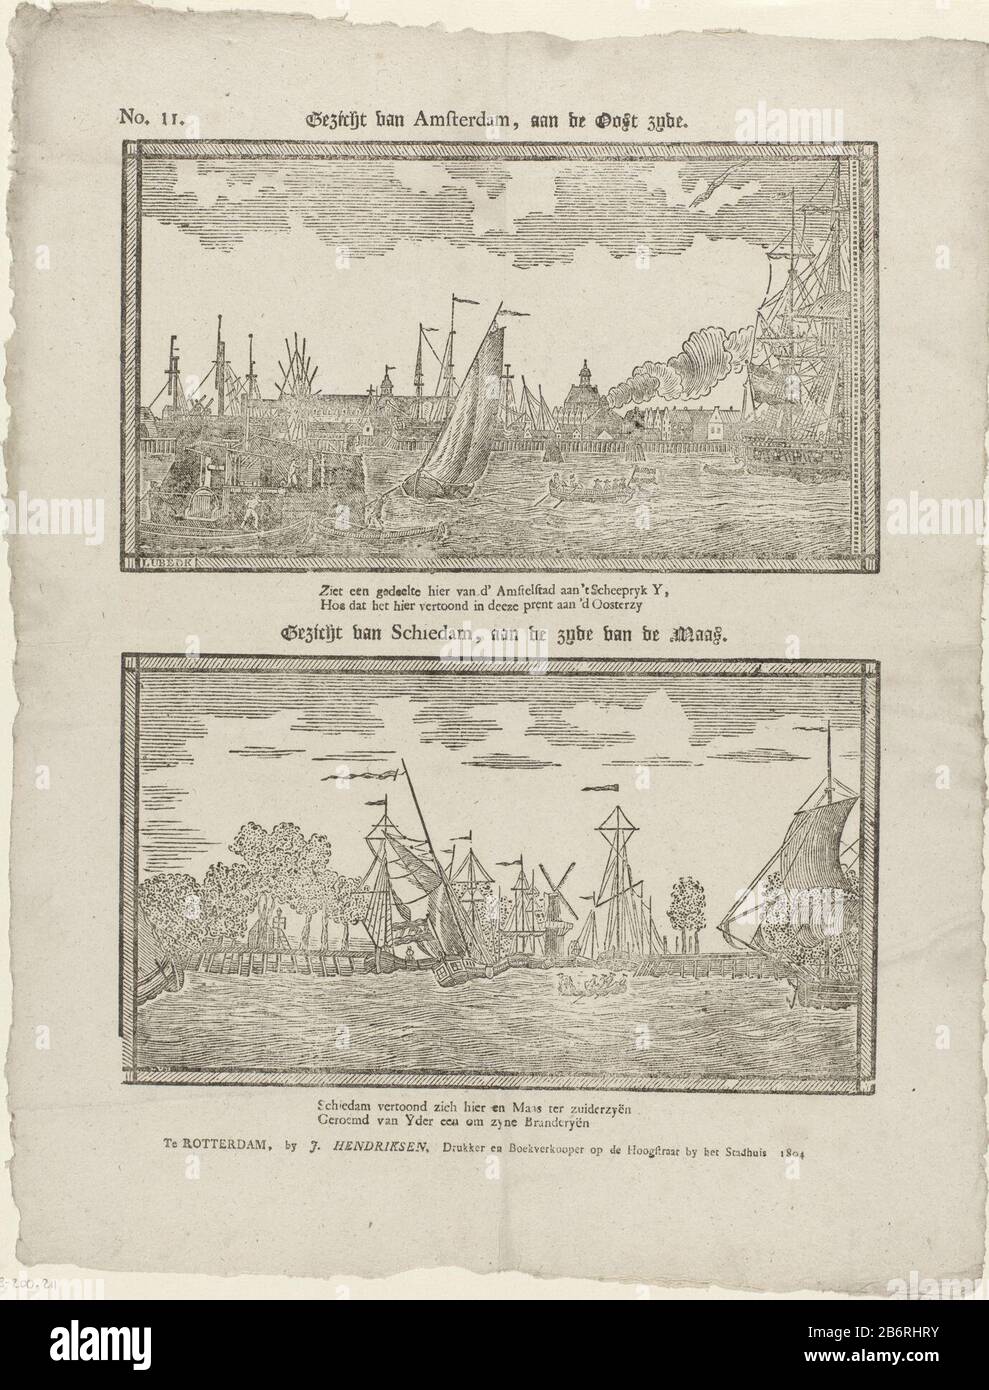 Gezicht van Amsterdam, aan de oost zyde Gezicht van Schiedam, aan de zyde van de Maas (titel op object) Leaf with two performances. Above: a view of Amsterdam. Below: a view of Schiedam from the Meuse seen. Under each show a two-line signature. Numbered top left: No. 11. Manufacturer : printmaker: Hermanus van Lubeek (listed building) publisher: Jan Hendriksen (listed property) Place manufacture: Rotterdam Date: 1804 Physical features: woodcut and text printing material: paper Technique: woodcut / printing sizes: sheet: H 414 mm × b 317 mm Subject: internships (in general) Where: Amsterdam Sch Stock Photo